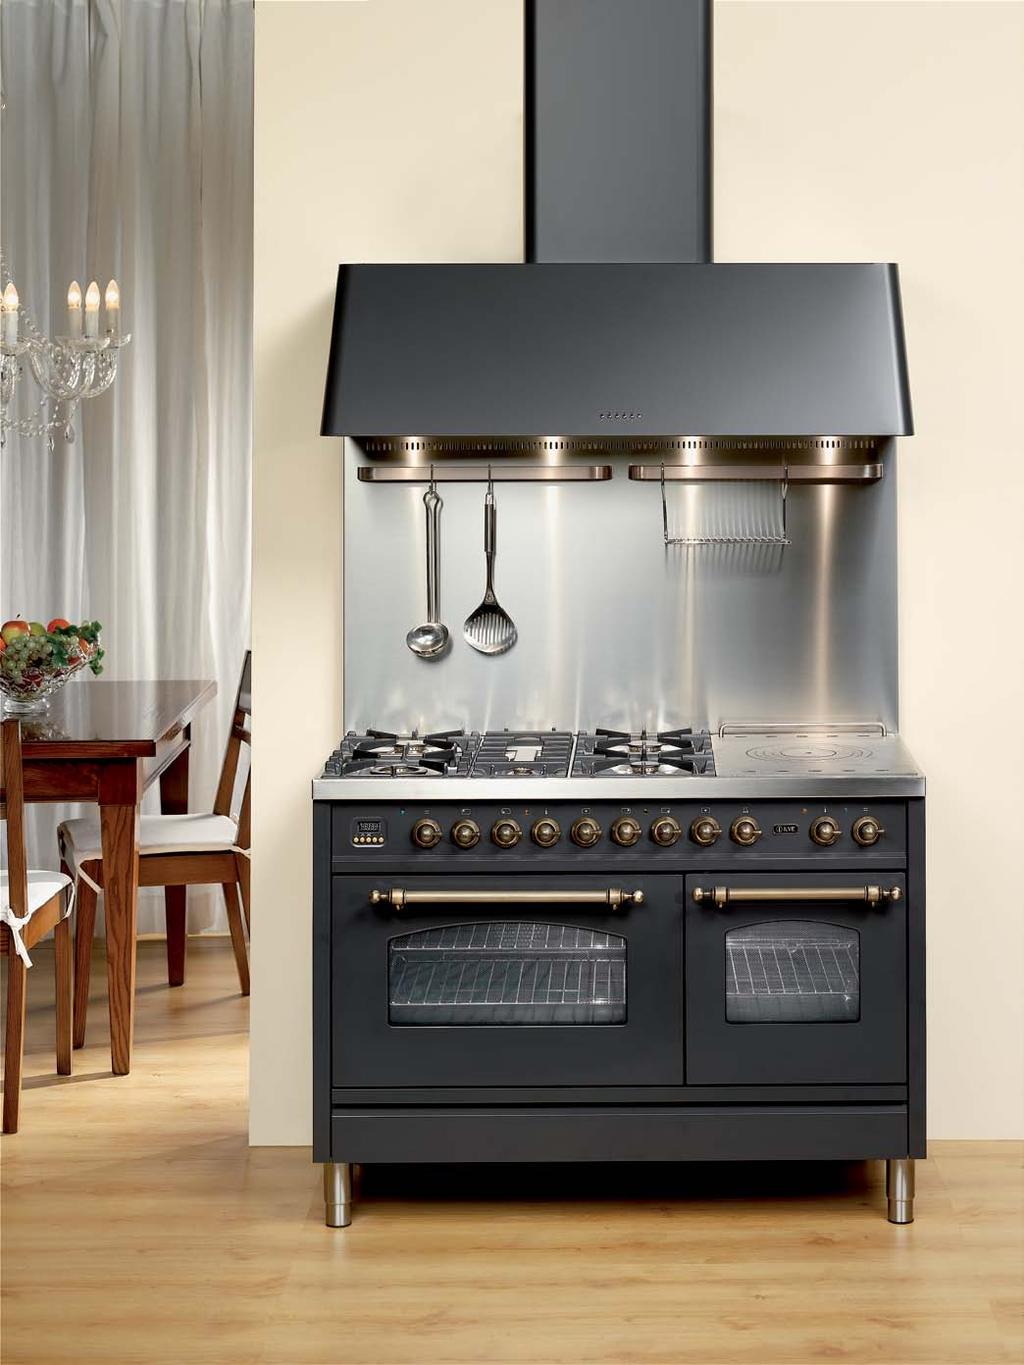 Nostalgie SERIES TRADITIONAL COUNTRY STYLE ovens Nostalgie SERIES ILVE Nostalgie ovens offer attractive and traditional country style finishes that enhance the appearance of any kitchen.